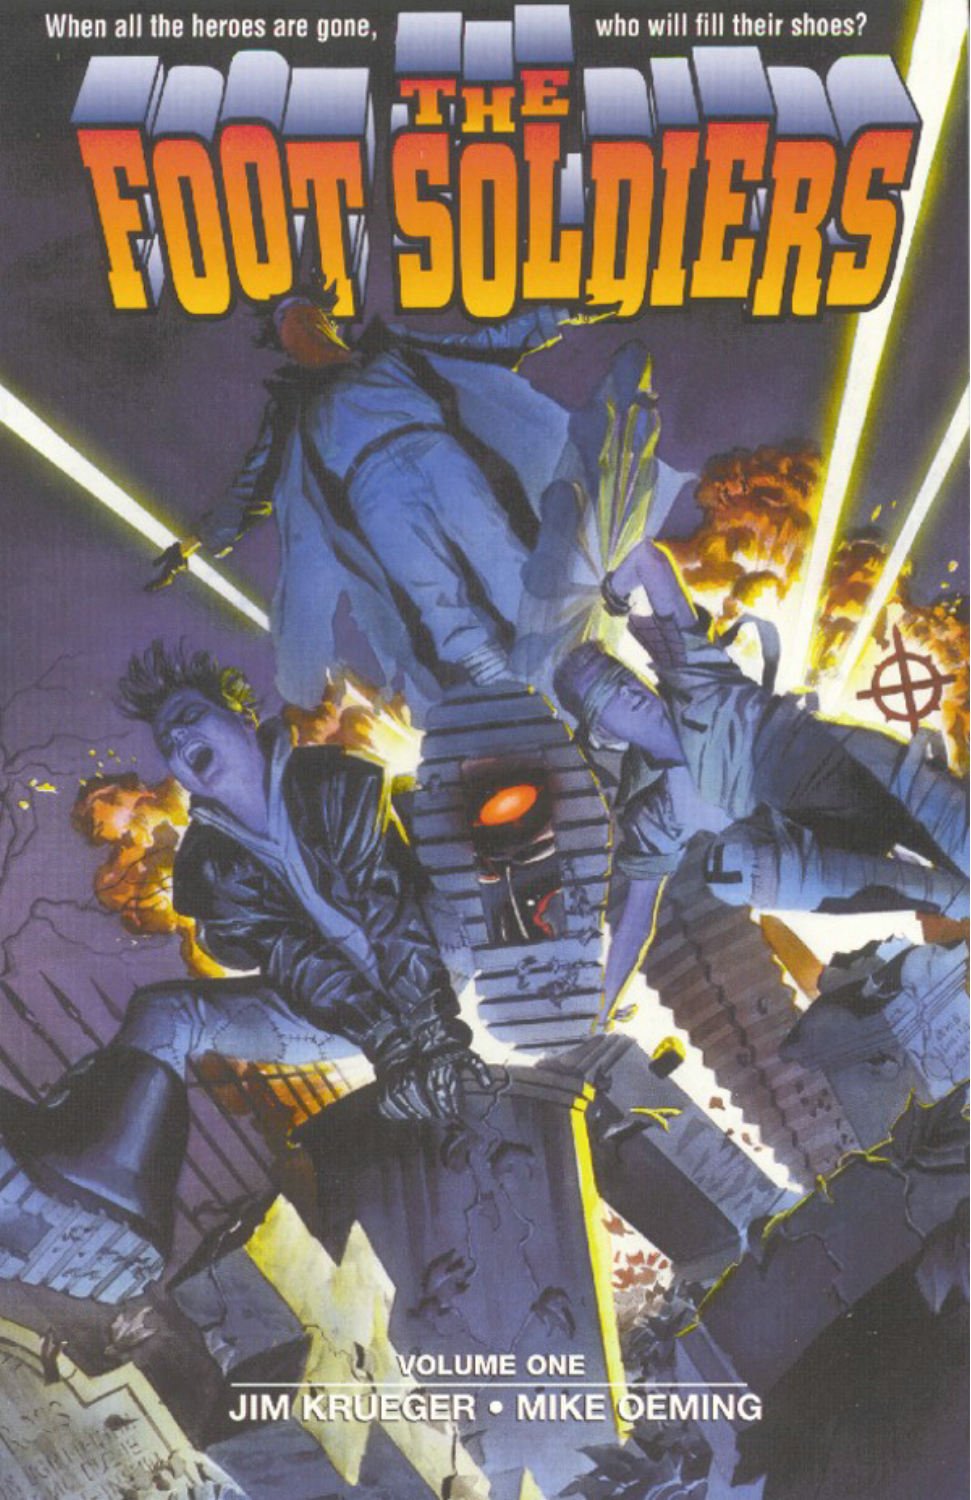 The Footsoldiers Volume. 1